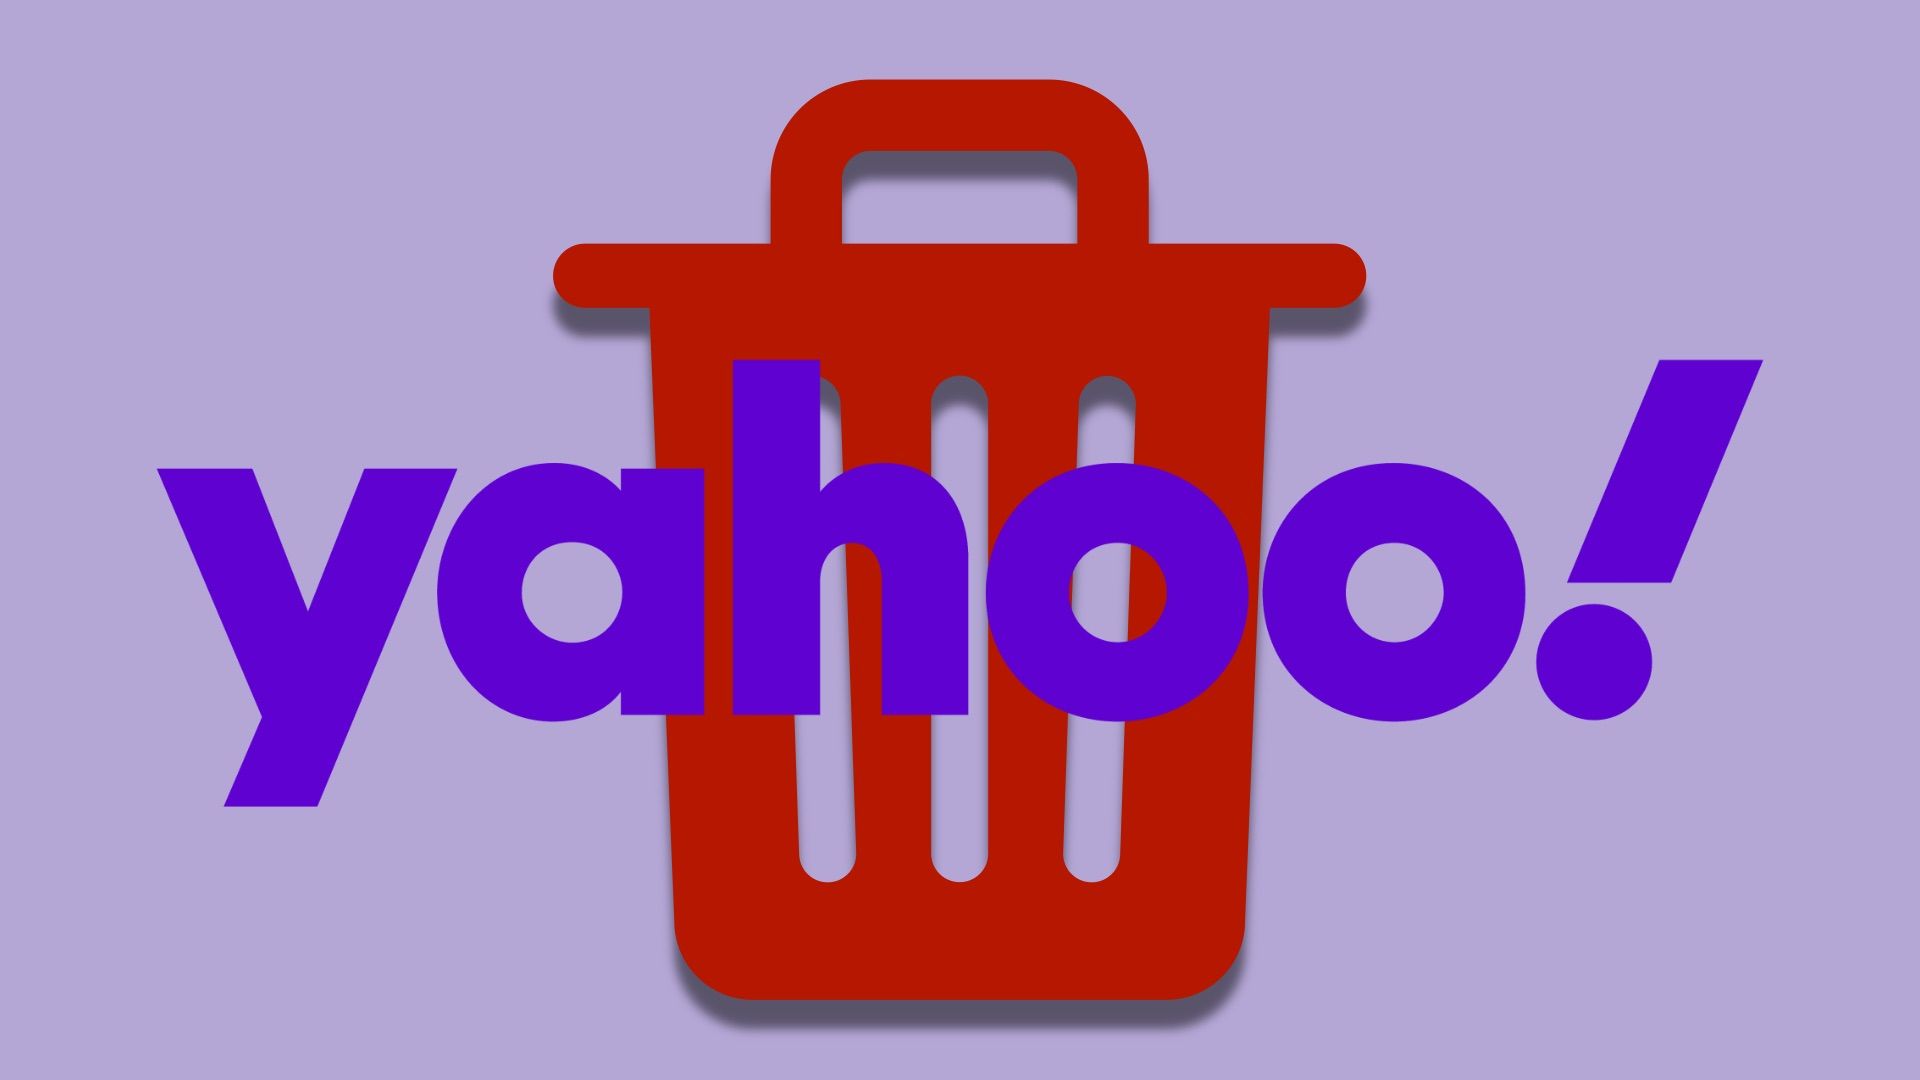 Image with Yahoo logo and trash can